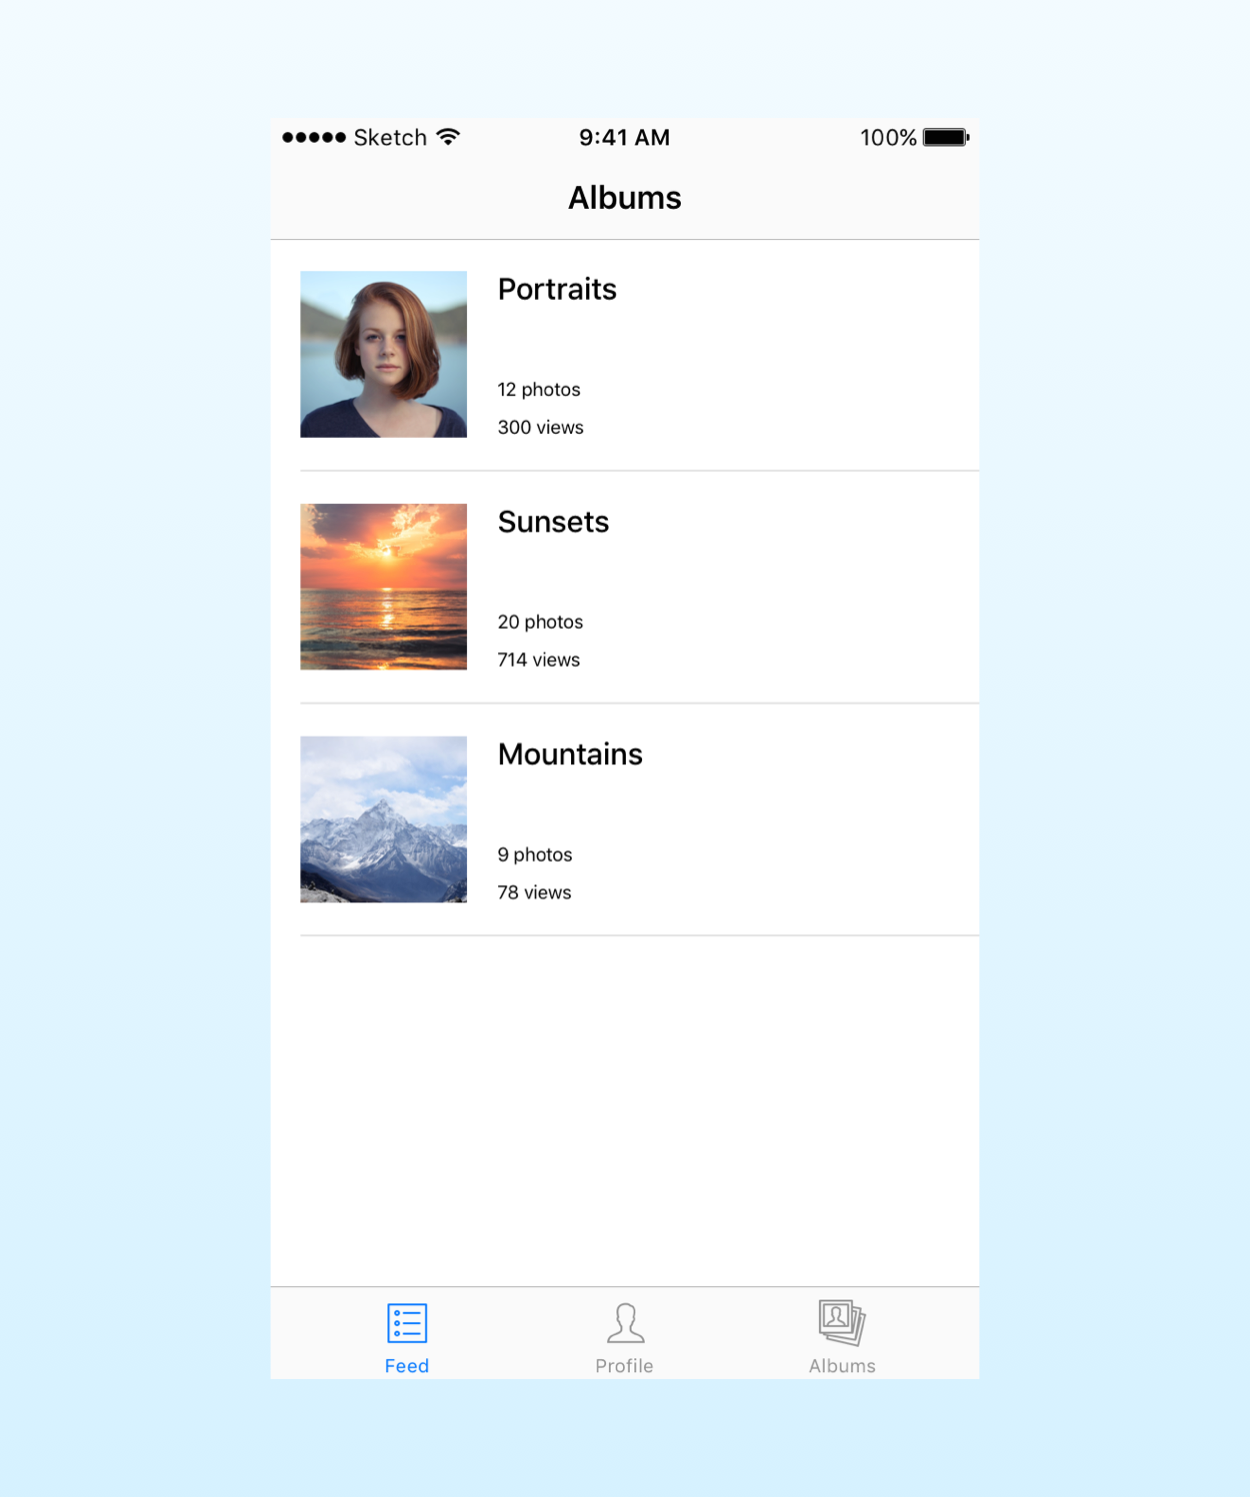 The albums screen for our app prototype as designed in our mockup